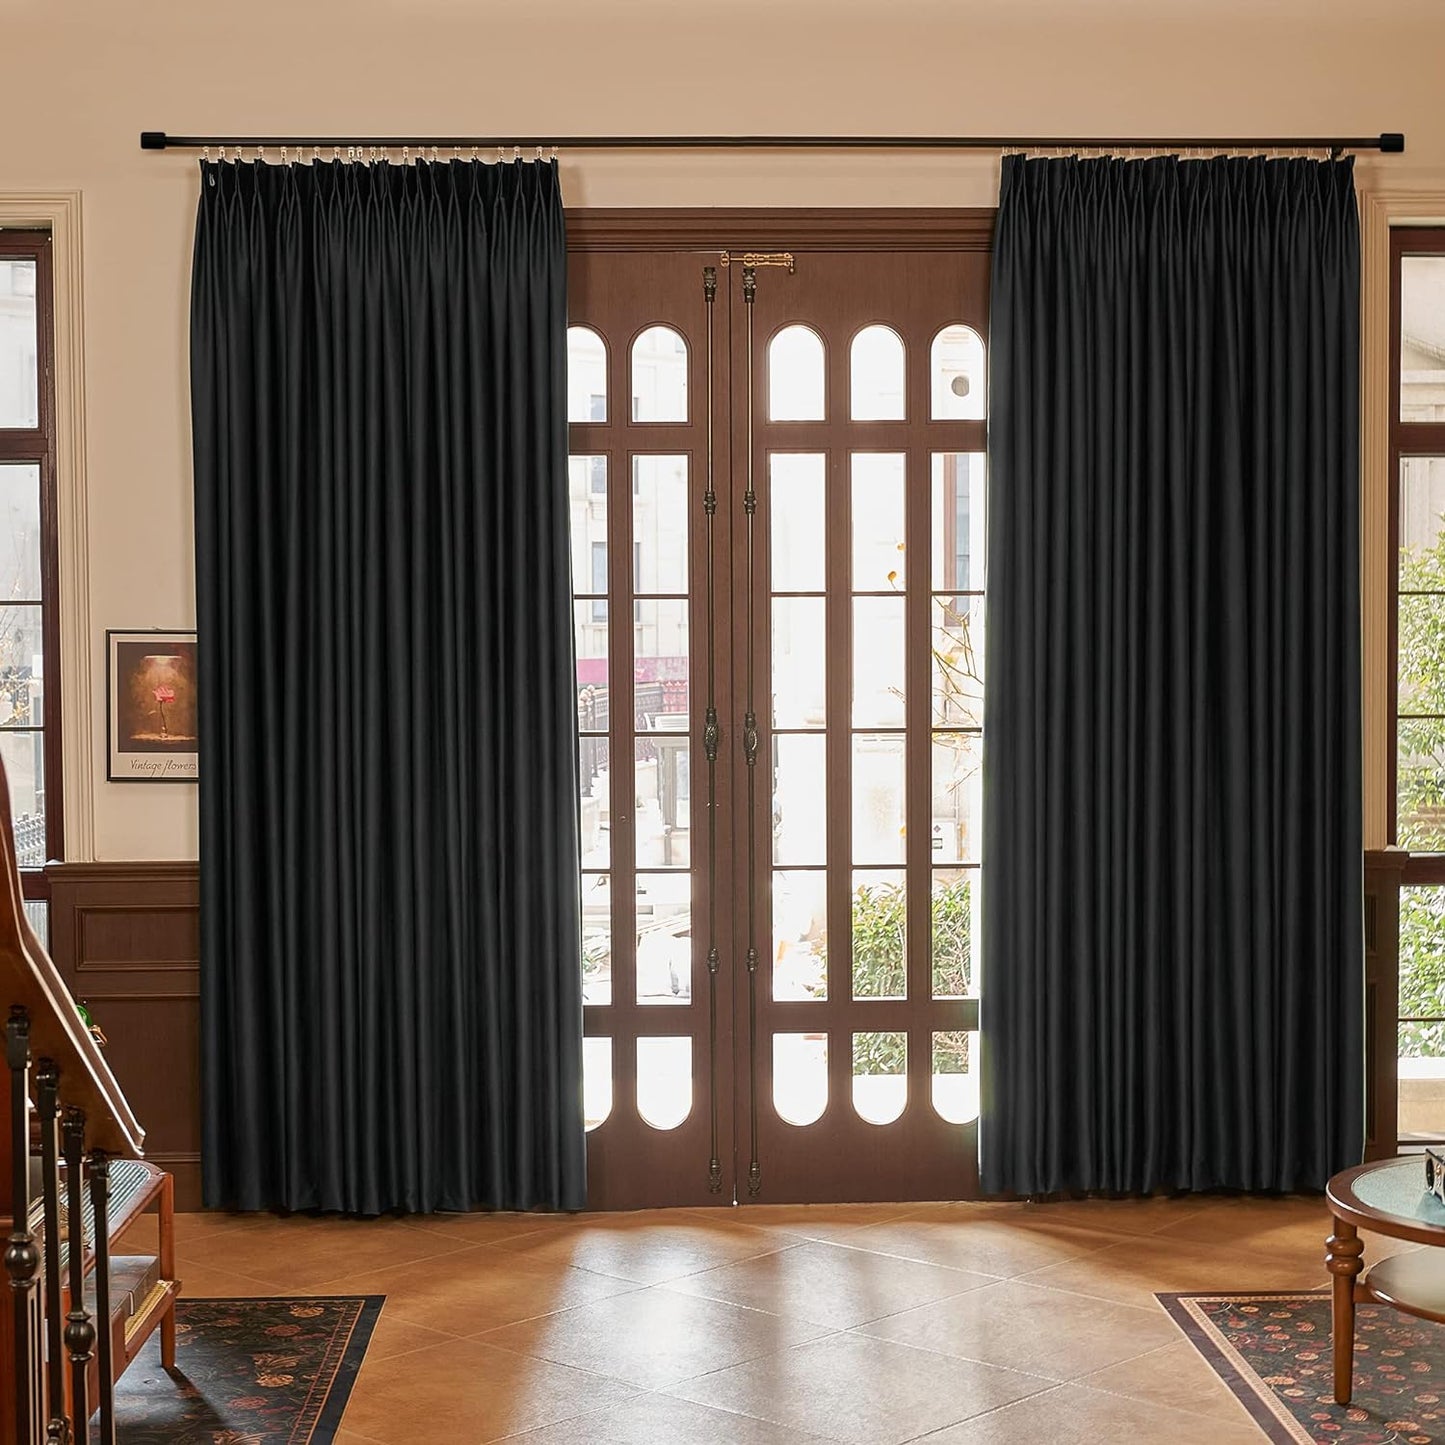 HUTO Beige Pinch Pleated Curtains Thermal Insulated Room Darkening Window Treatment Panel for Living Room, Bedroom, Kitchen, Small Window, 52 by 63 Inches Long, 1 Panel  HUTO Black 72"W X 96"L 